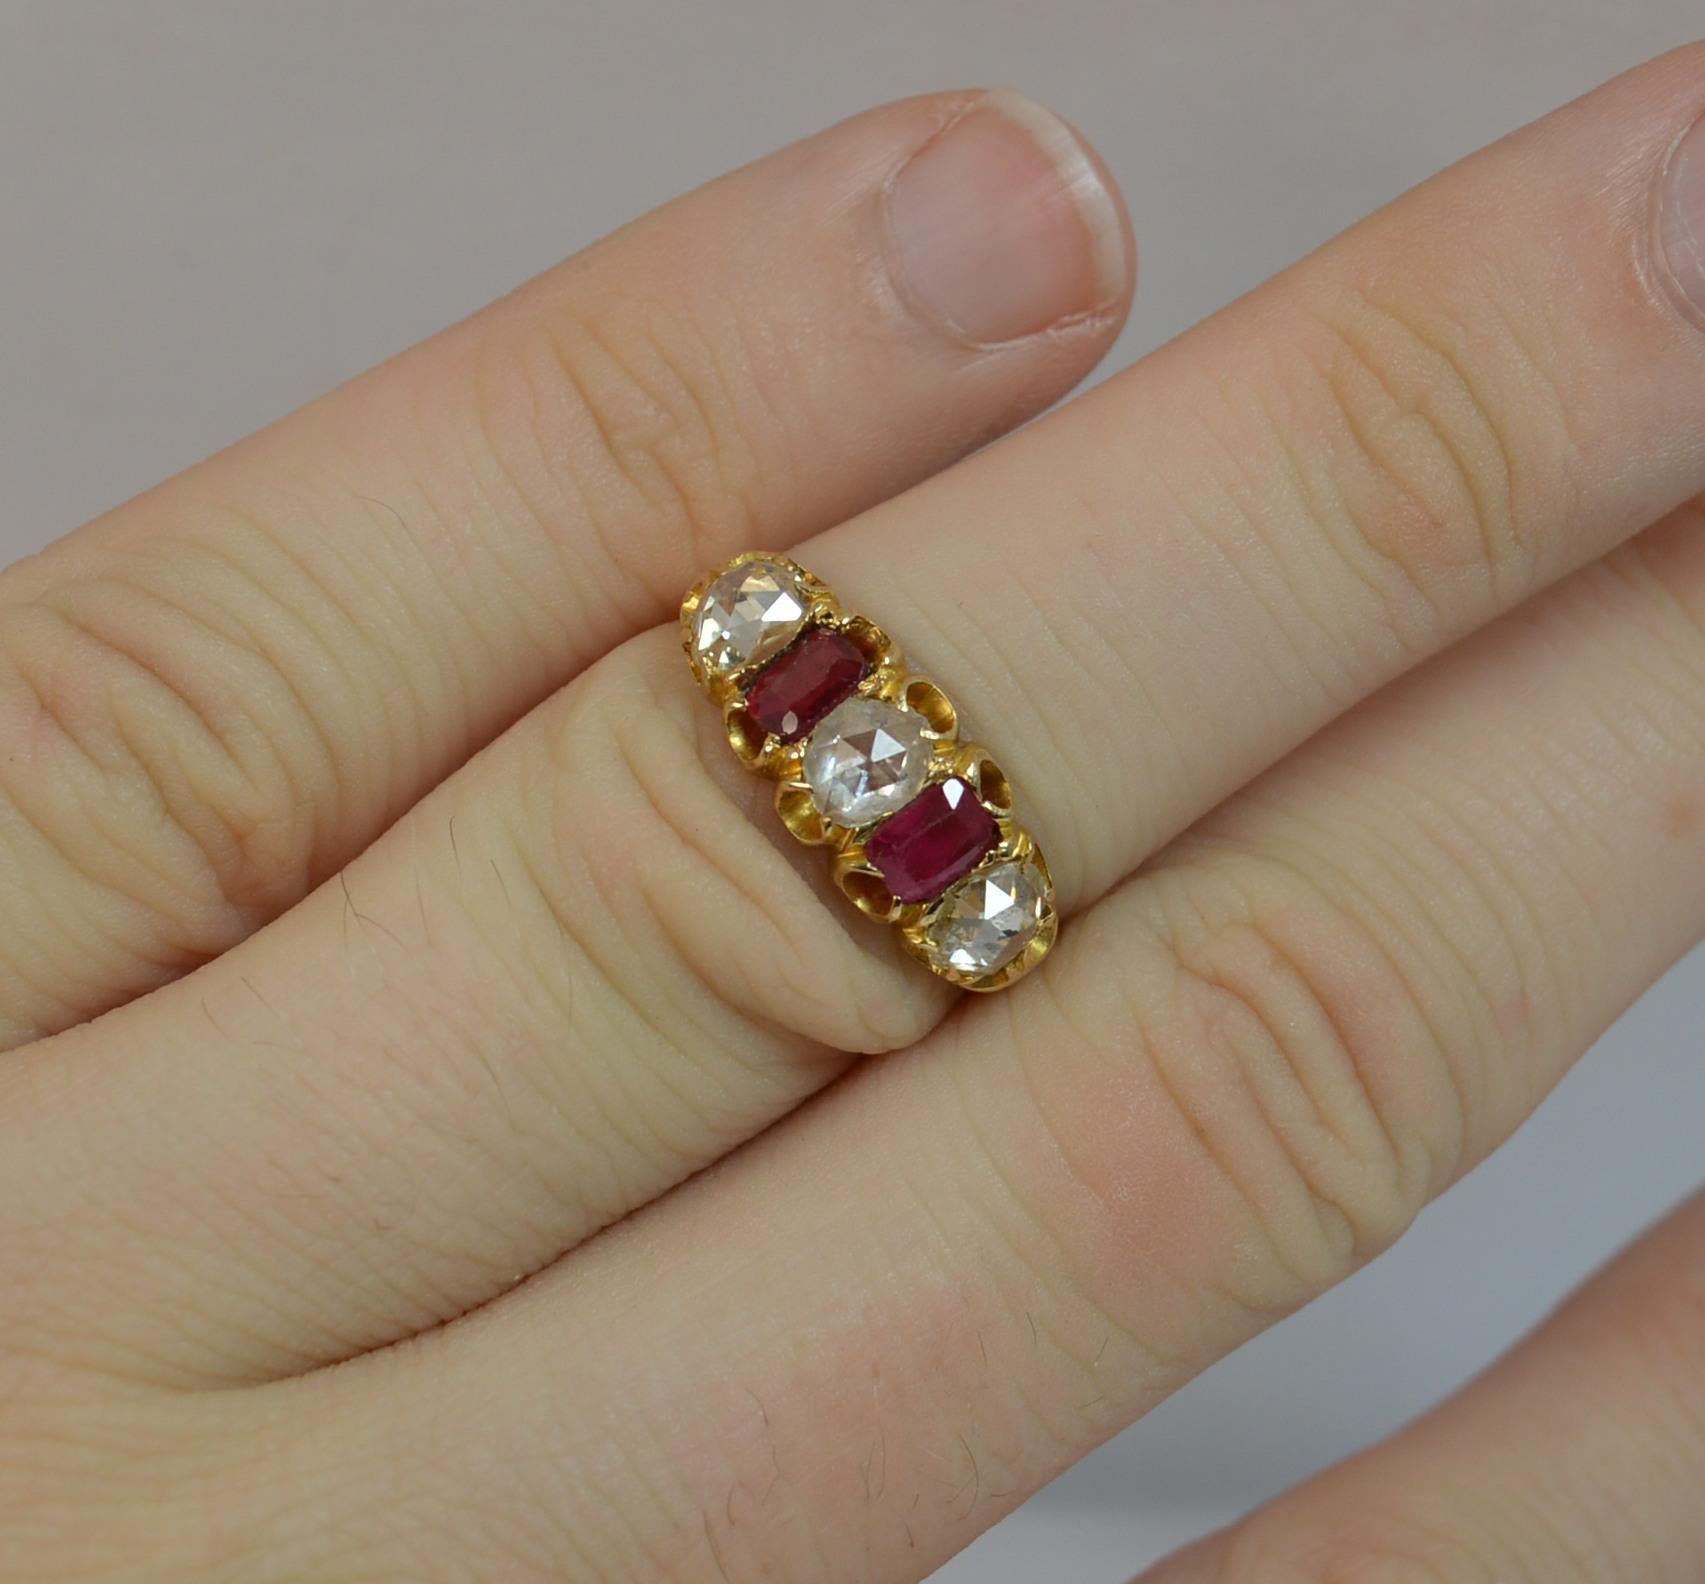 
A stunning Victorian period five stone ring. c1880.

Solid 15 carat gold shank and setting.

Designed wth three large rose cut diamonds to total 1.20 carats approx. In between are old emerald shaped red stones. 

17mm spread of stones. 7.2mm wide